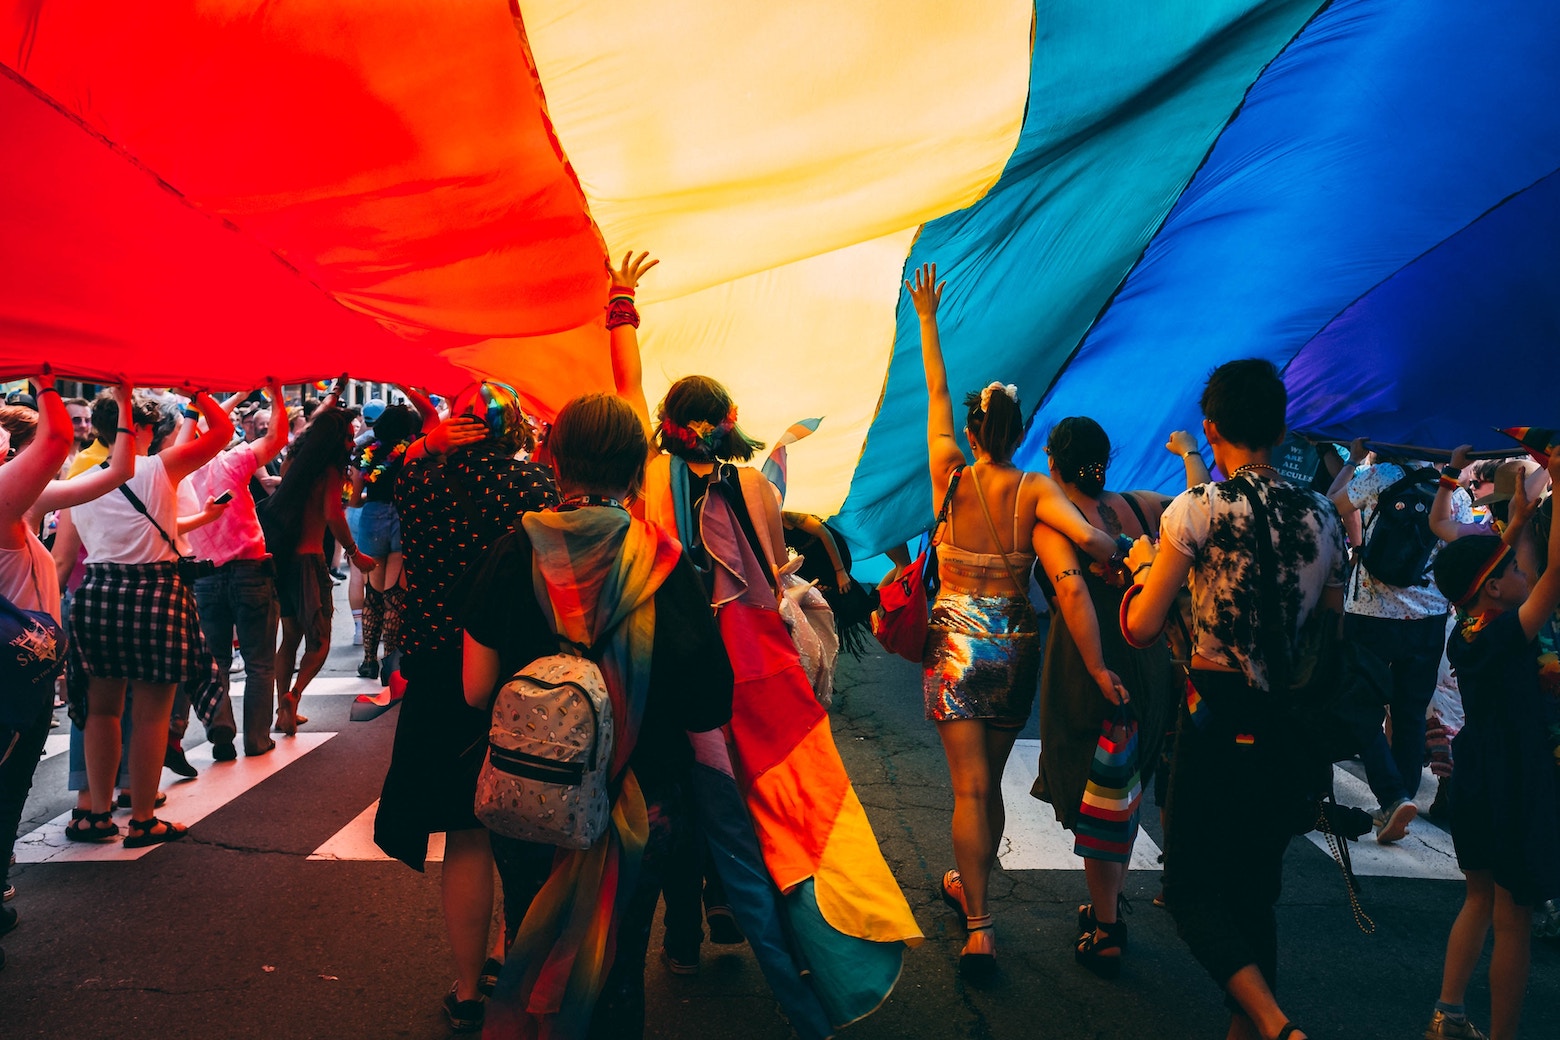 Parade goers collectively hold up a giant rainbow flag in honor of Pride Month.